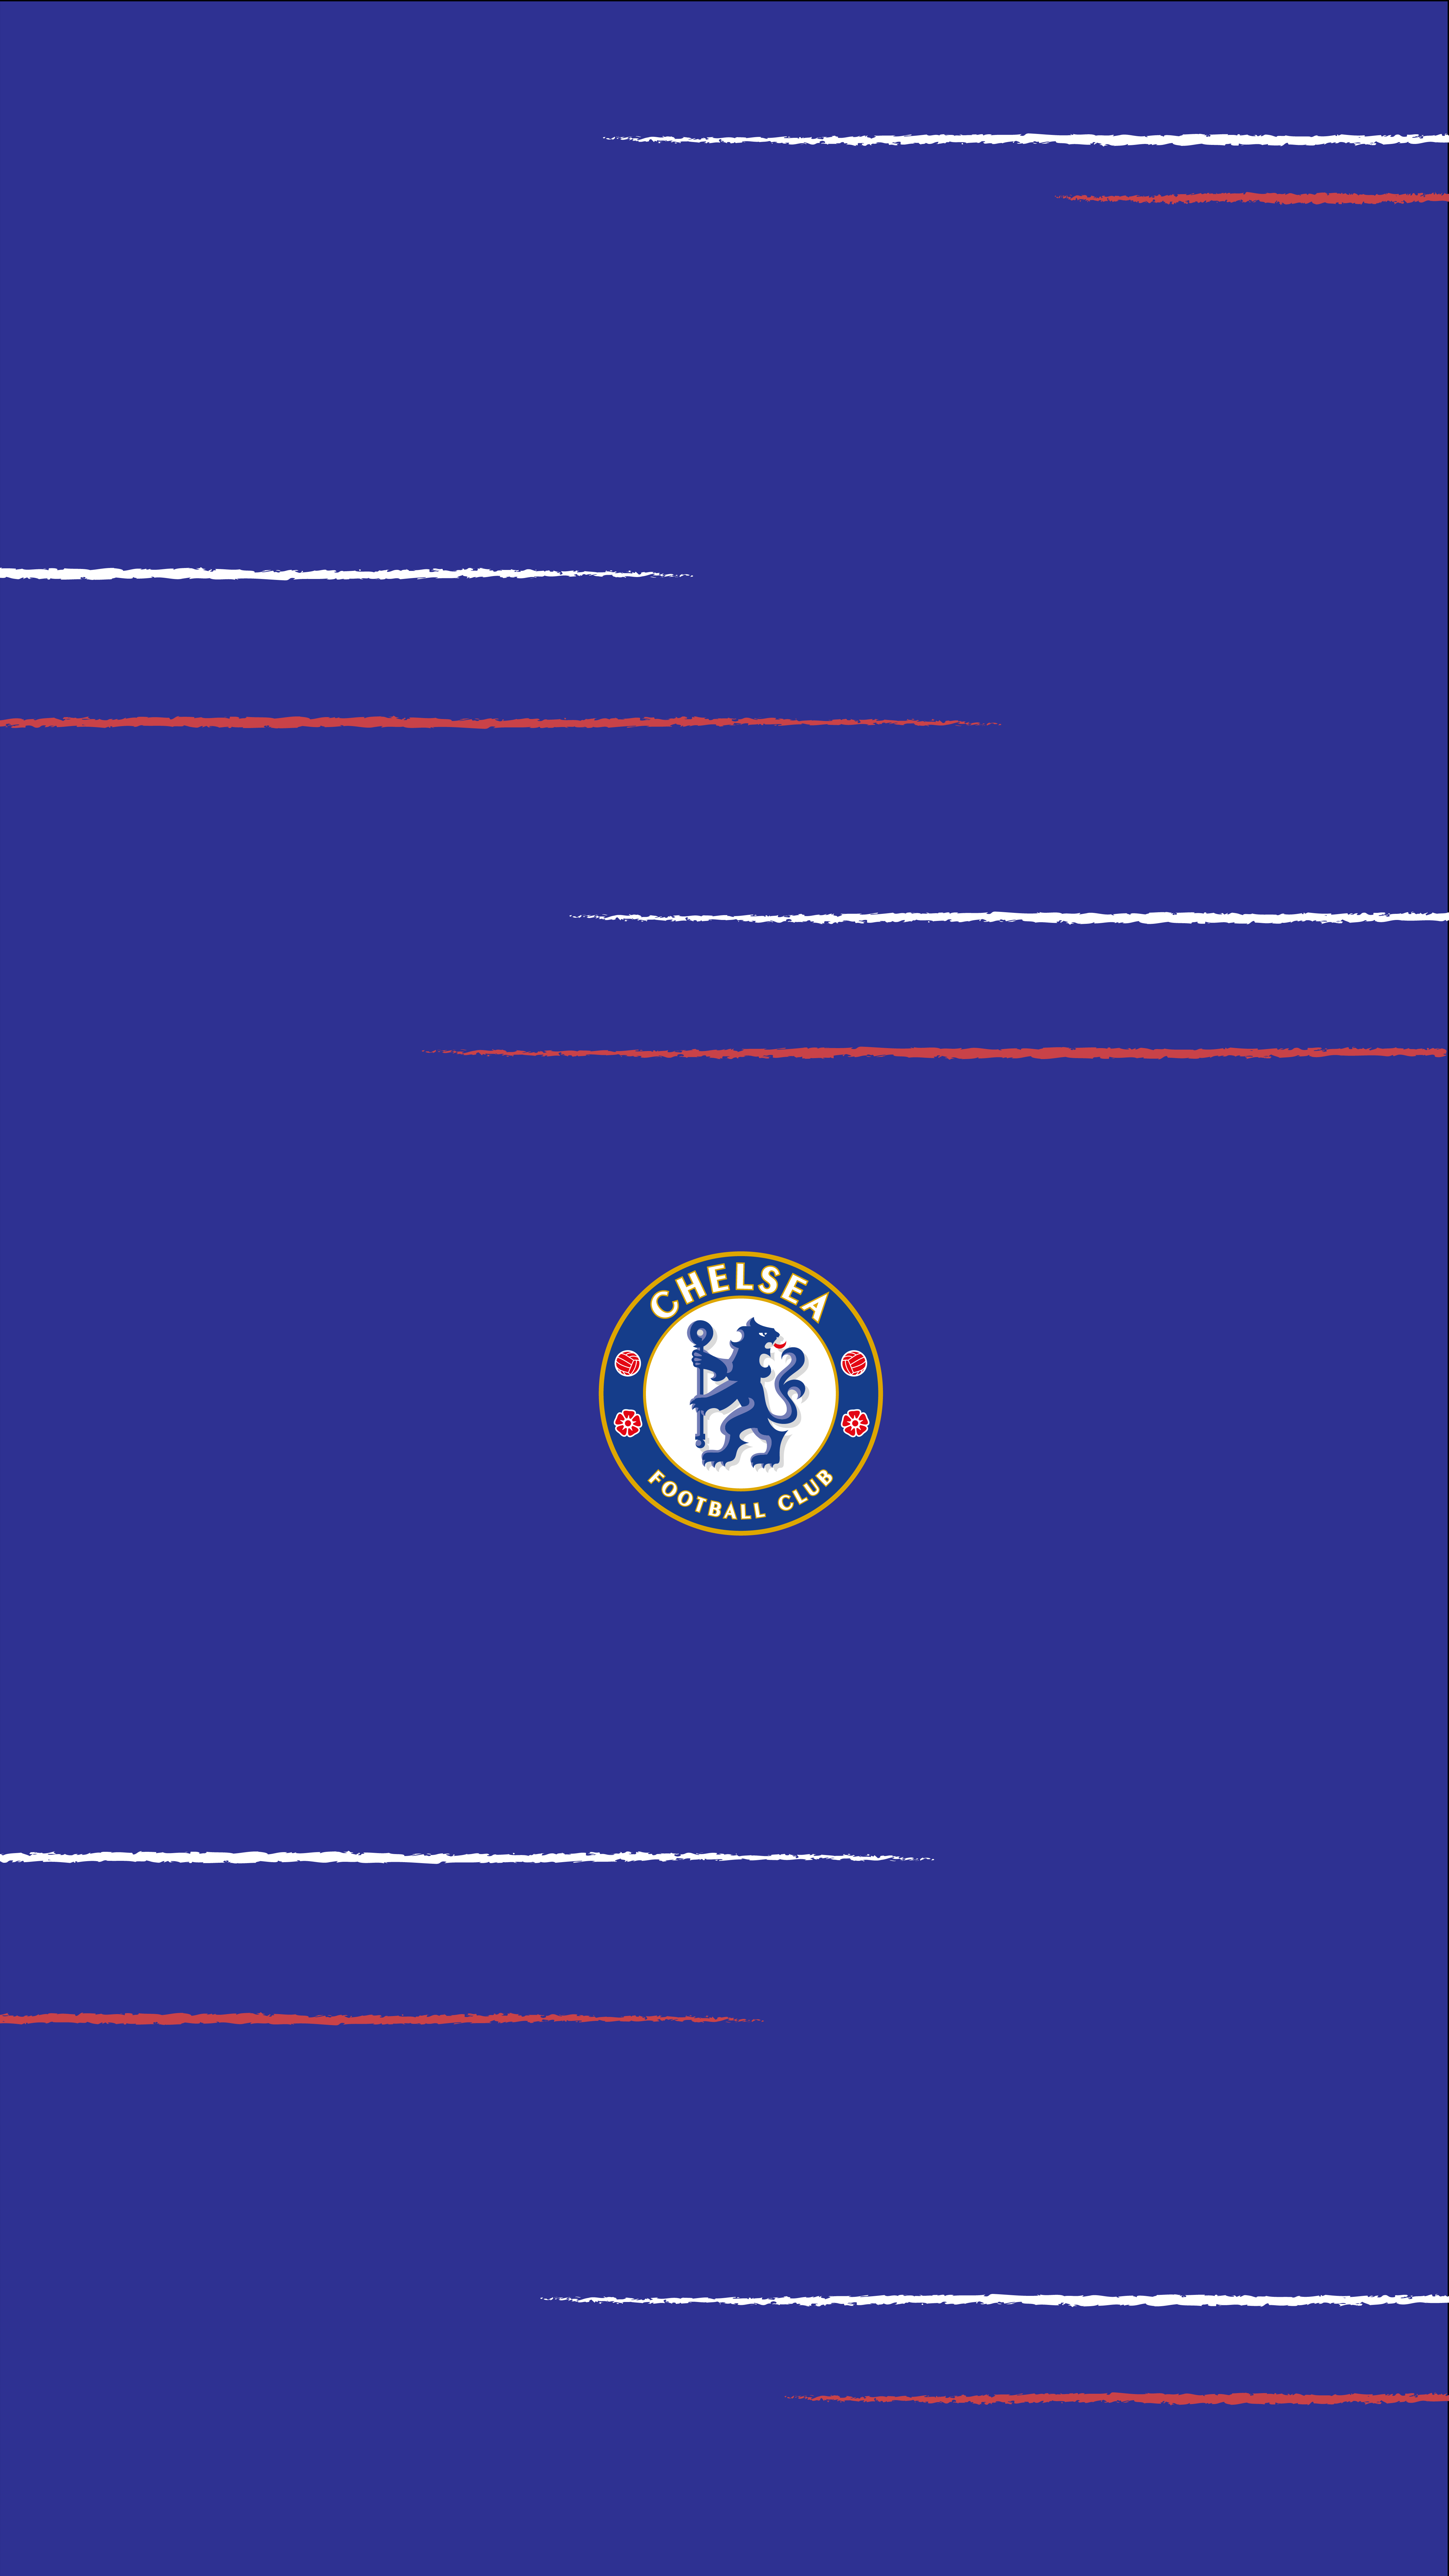 Phone wallpaper I made from the design of kit